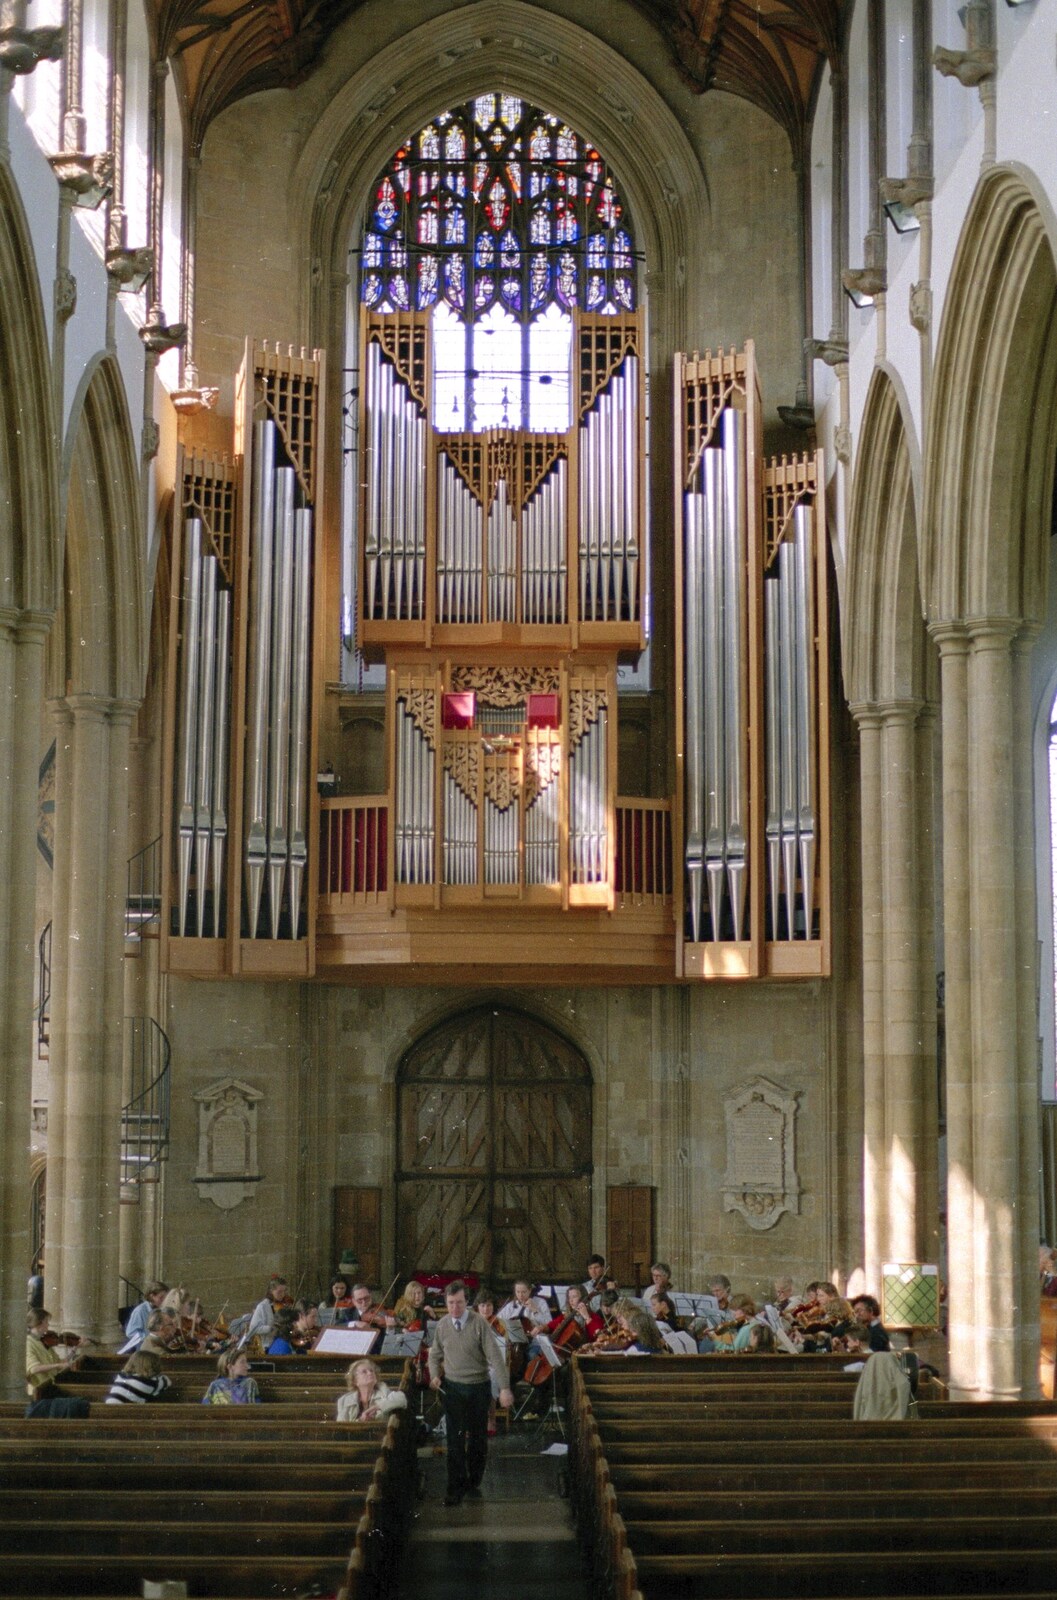 The organ of St. Peter Mancroft, Norwich from Tapestry With Baz, and a Trip to Blakeney, Suffolk and Norfolk - 14th May 1990